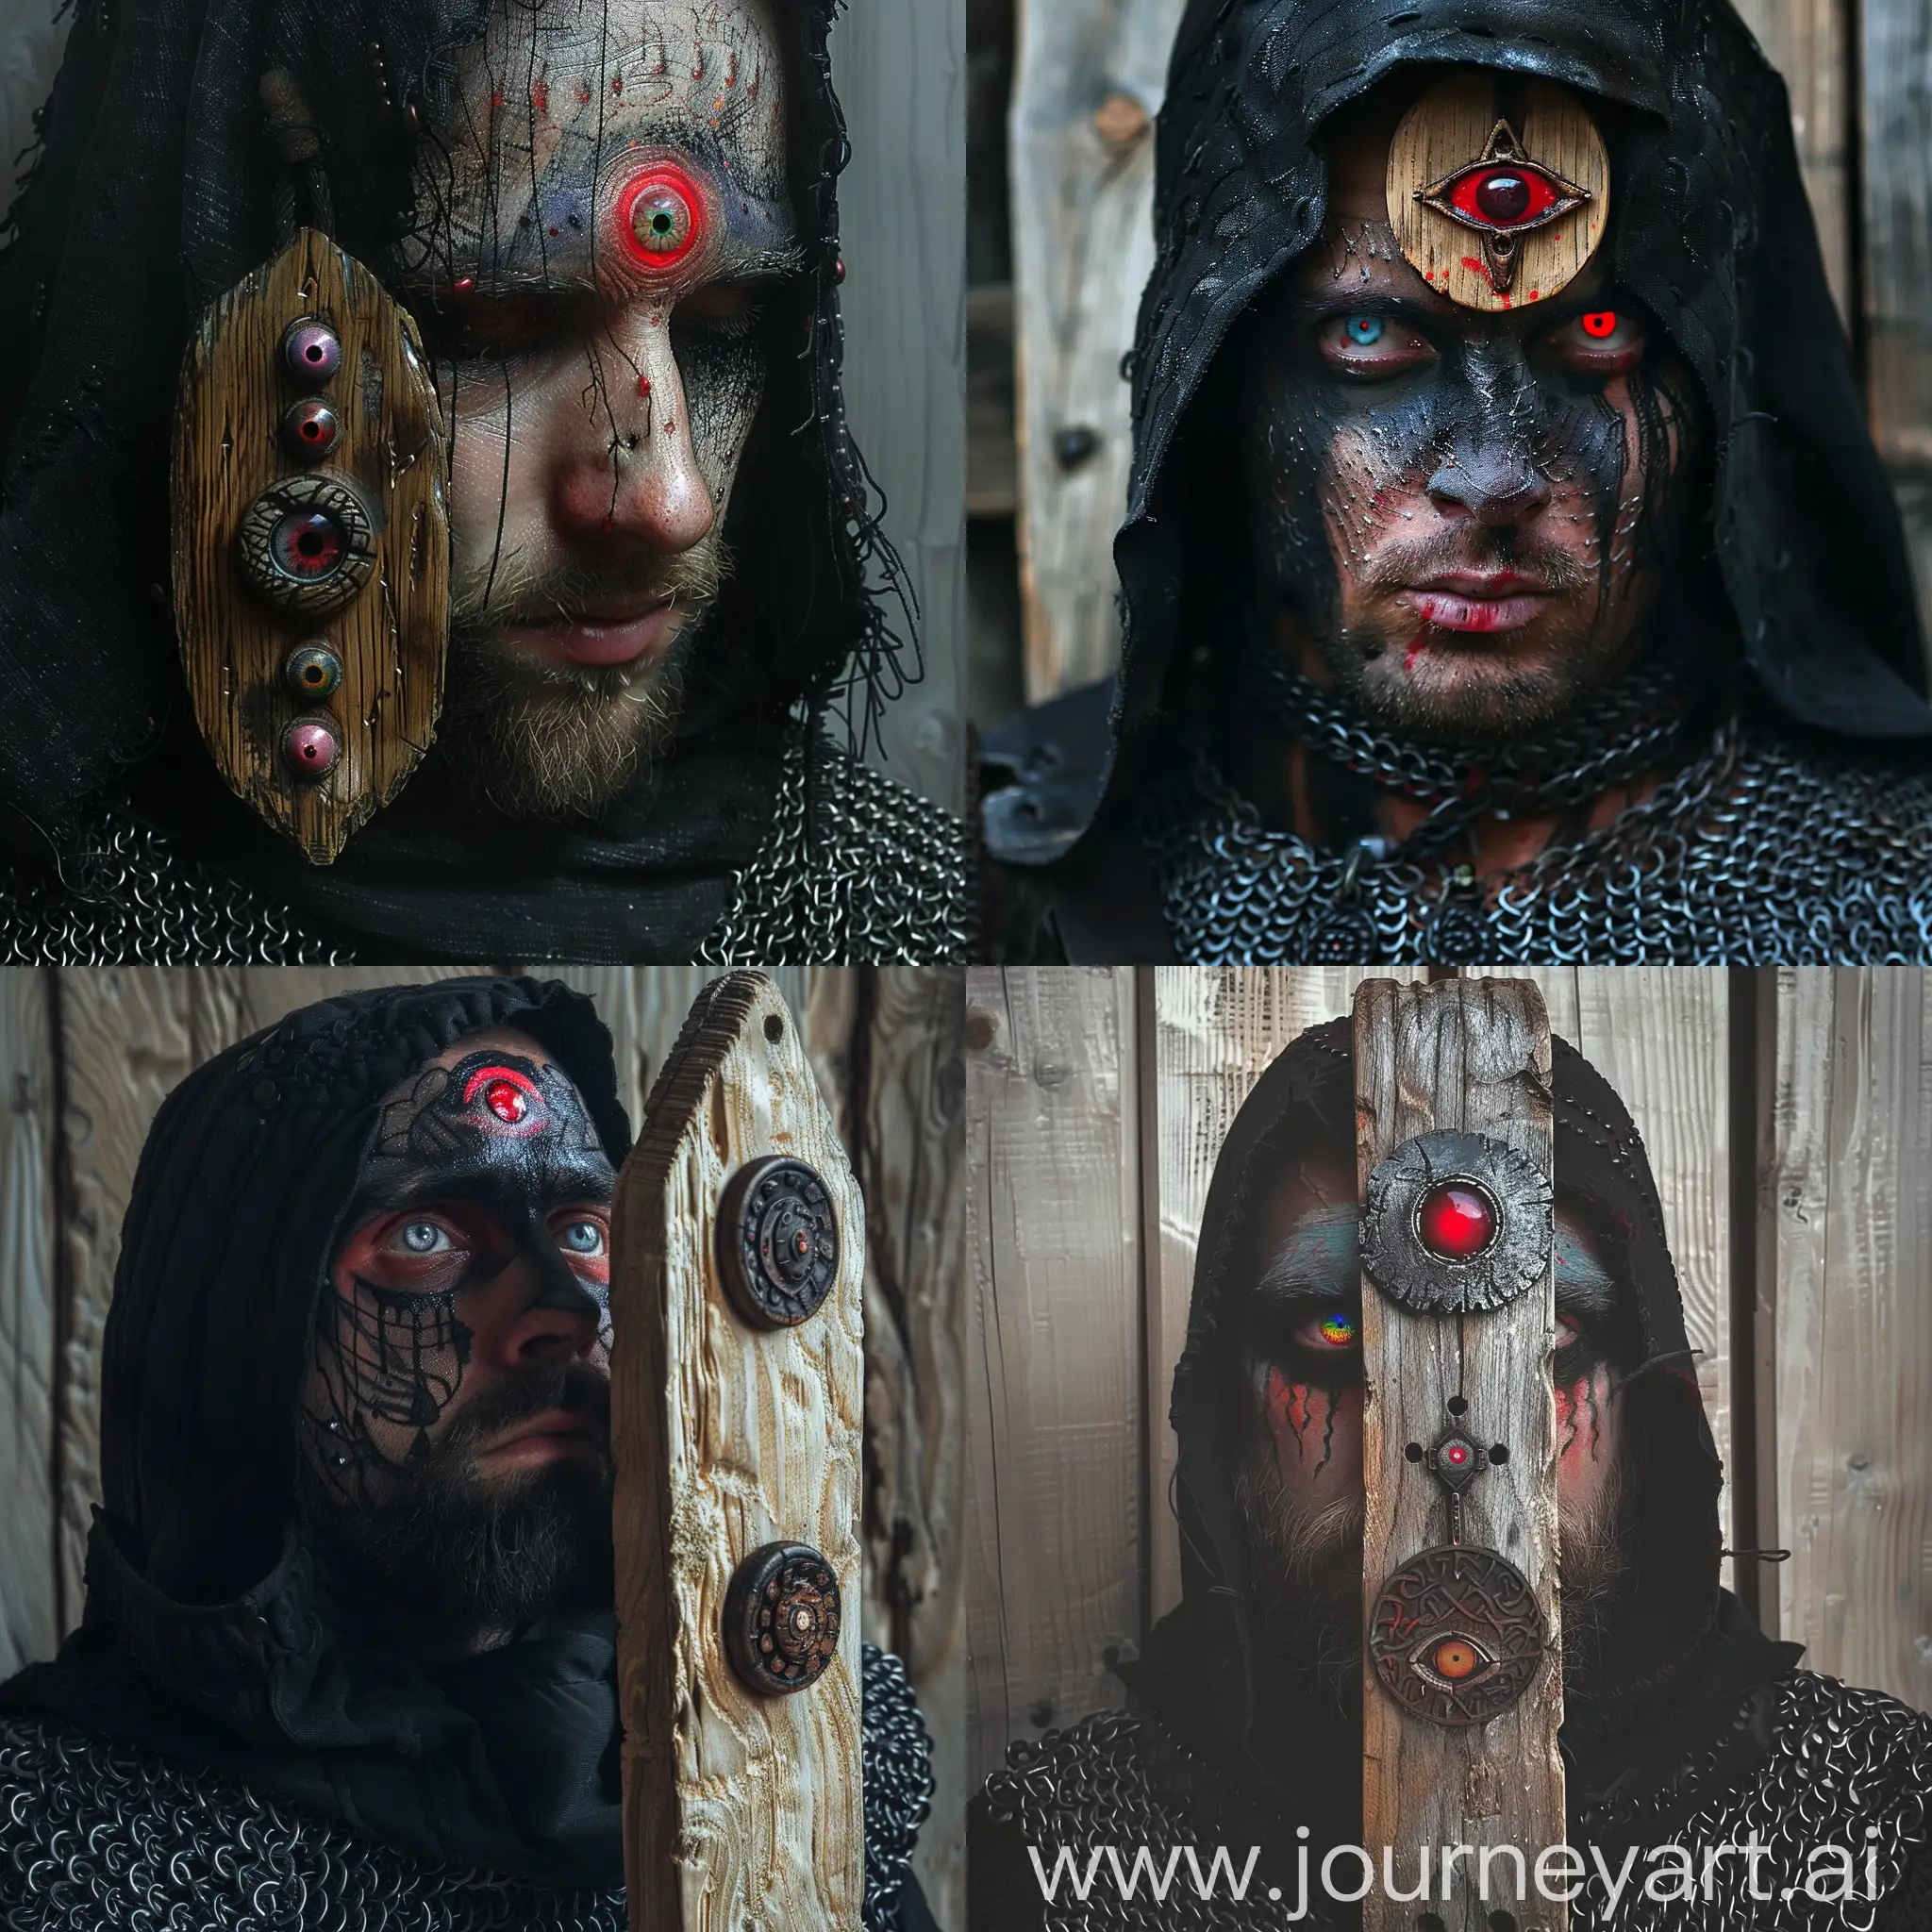 Mystical-Warrior-with-Red-Eye-Symbol-and-Chainmail-Armor